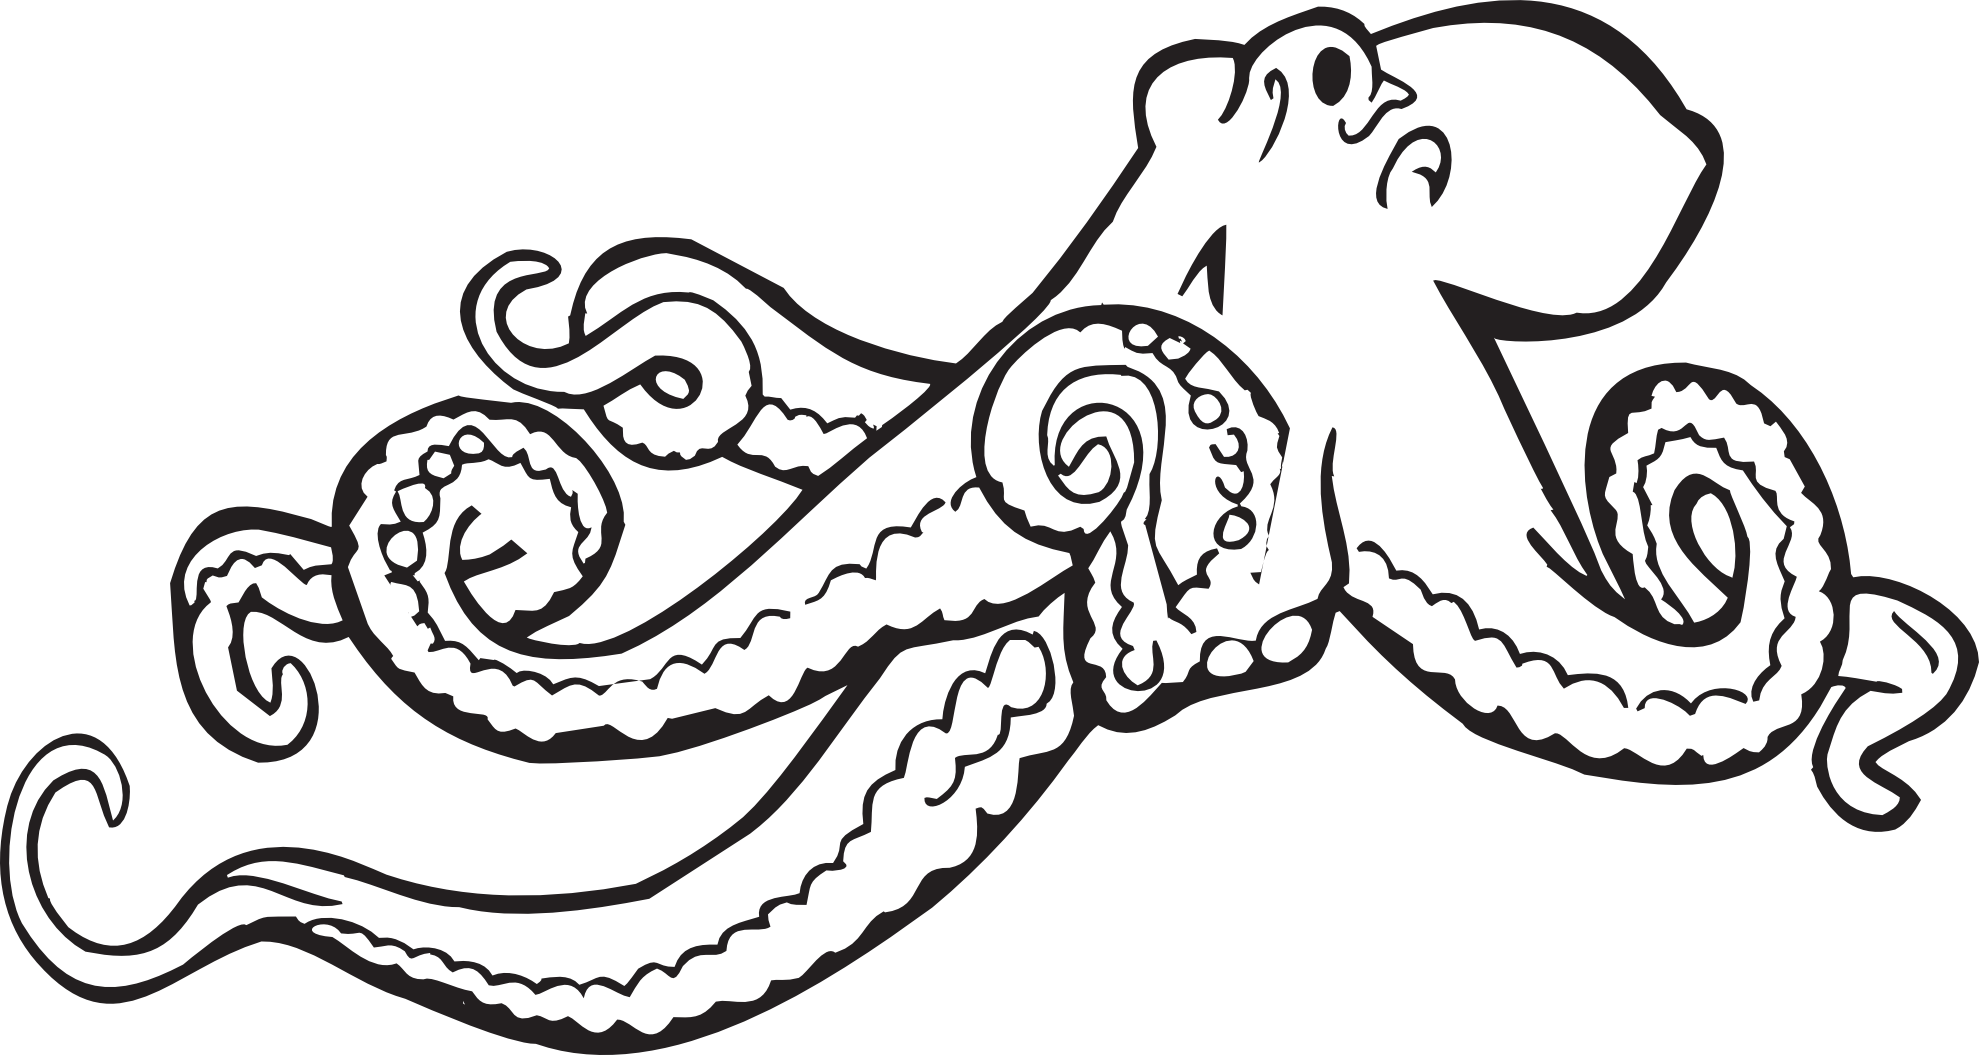 Octopus coloring page.